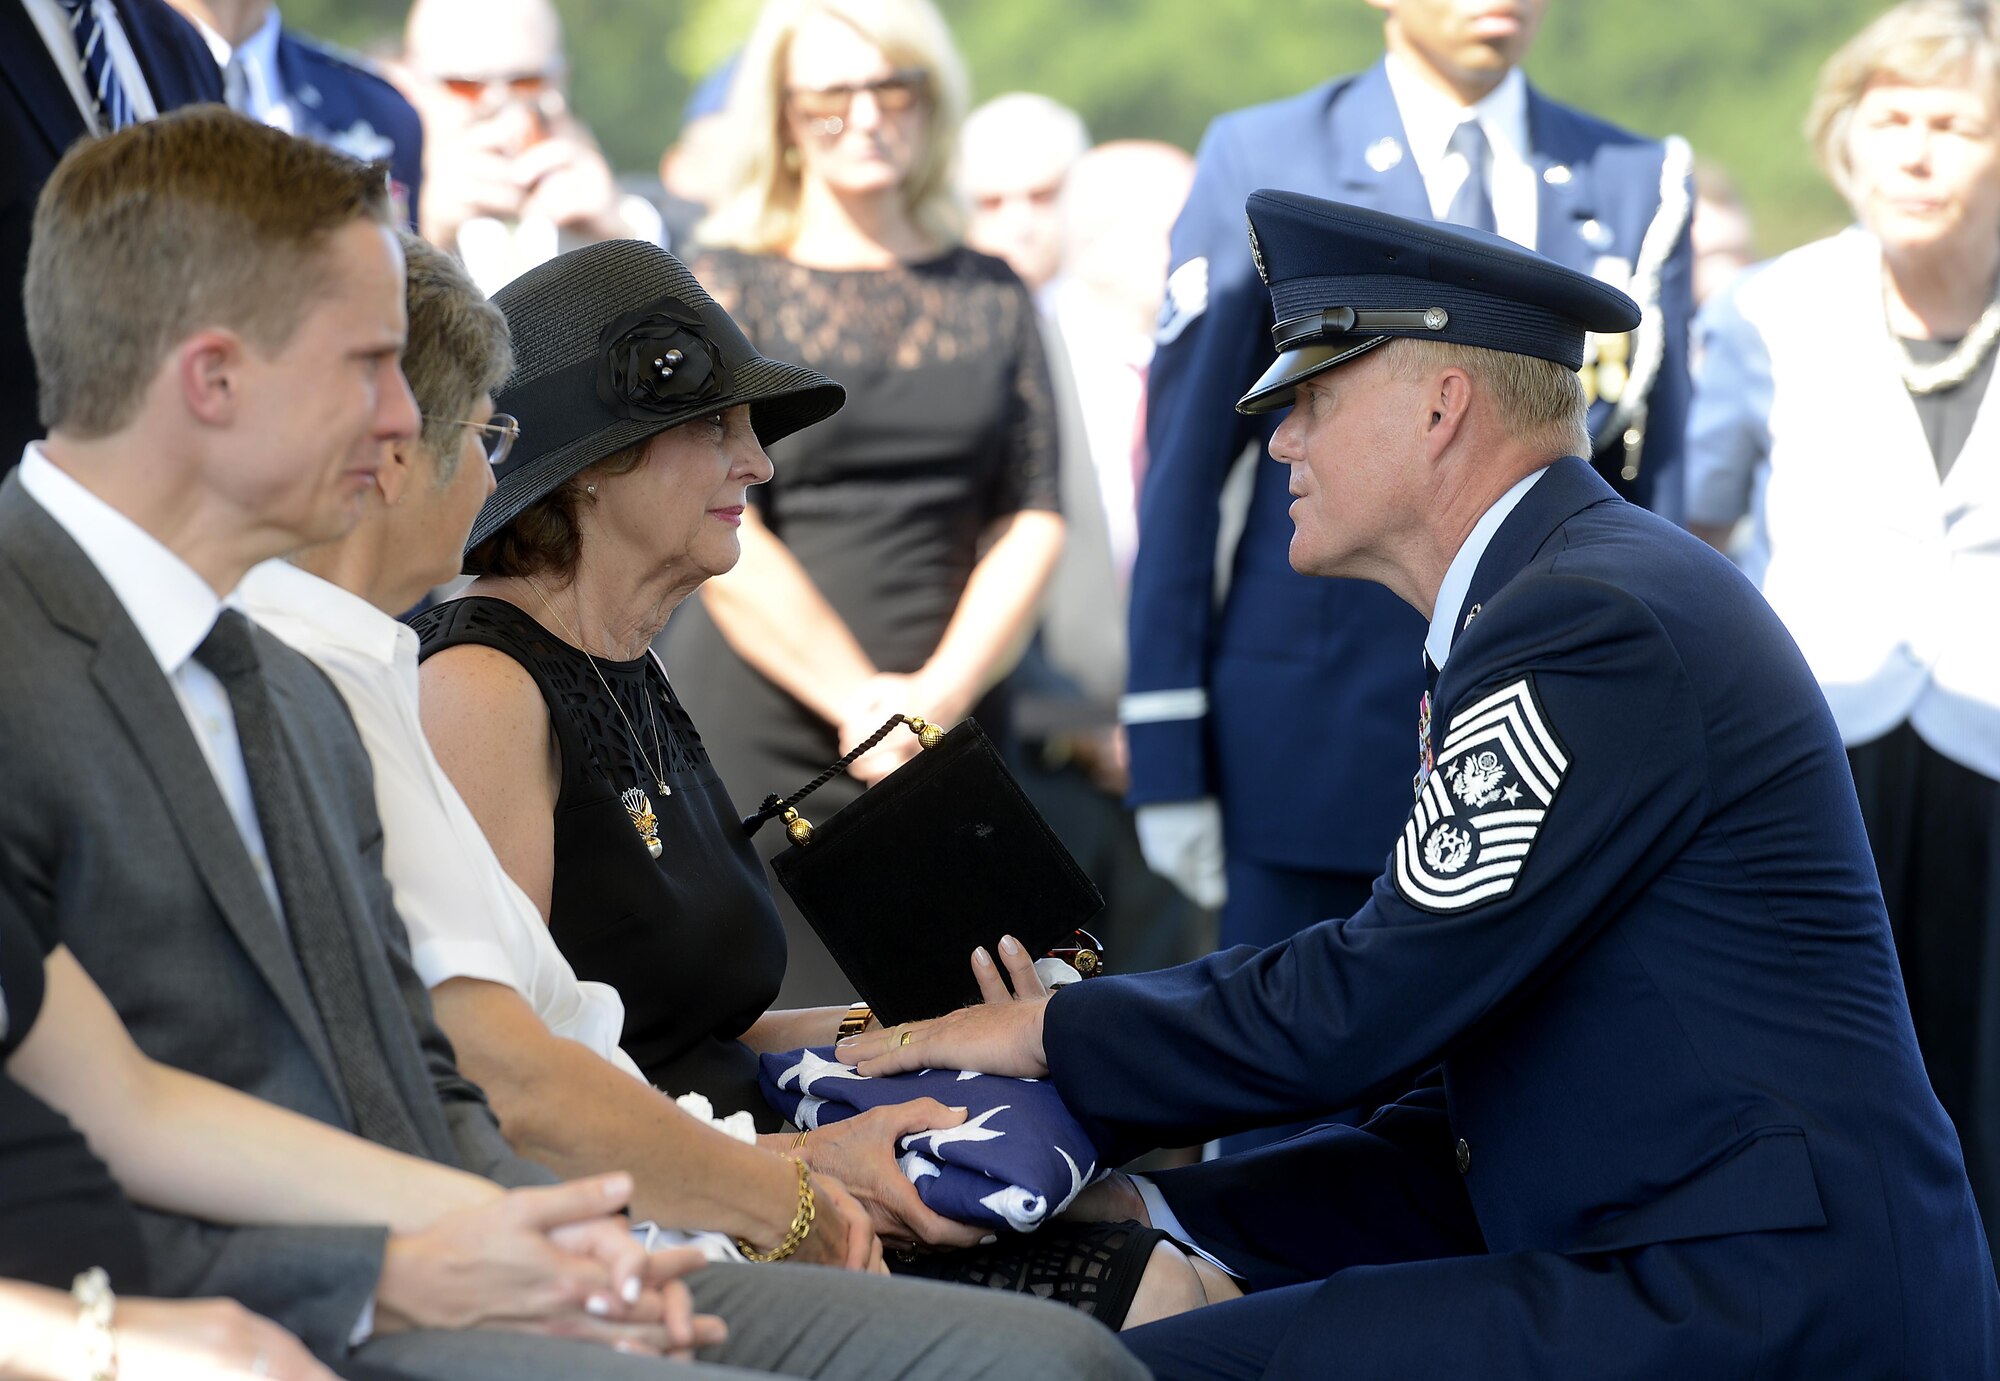 Chief Master Sgt. of the Air Force James A. Cody consoles Jan Binnicker, widow of ninth Chief Master Sgt. of the Air Force James Binnicker, before he is laid to rest in Arlington National Cemetery, Va., Aug. 14, 2015. Binnicker passed away March 21 in Calhoun, Ga. (U.S. Air Force photo/Scott M. Ash)